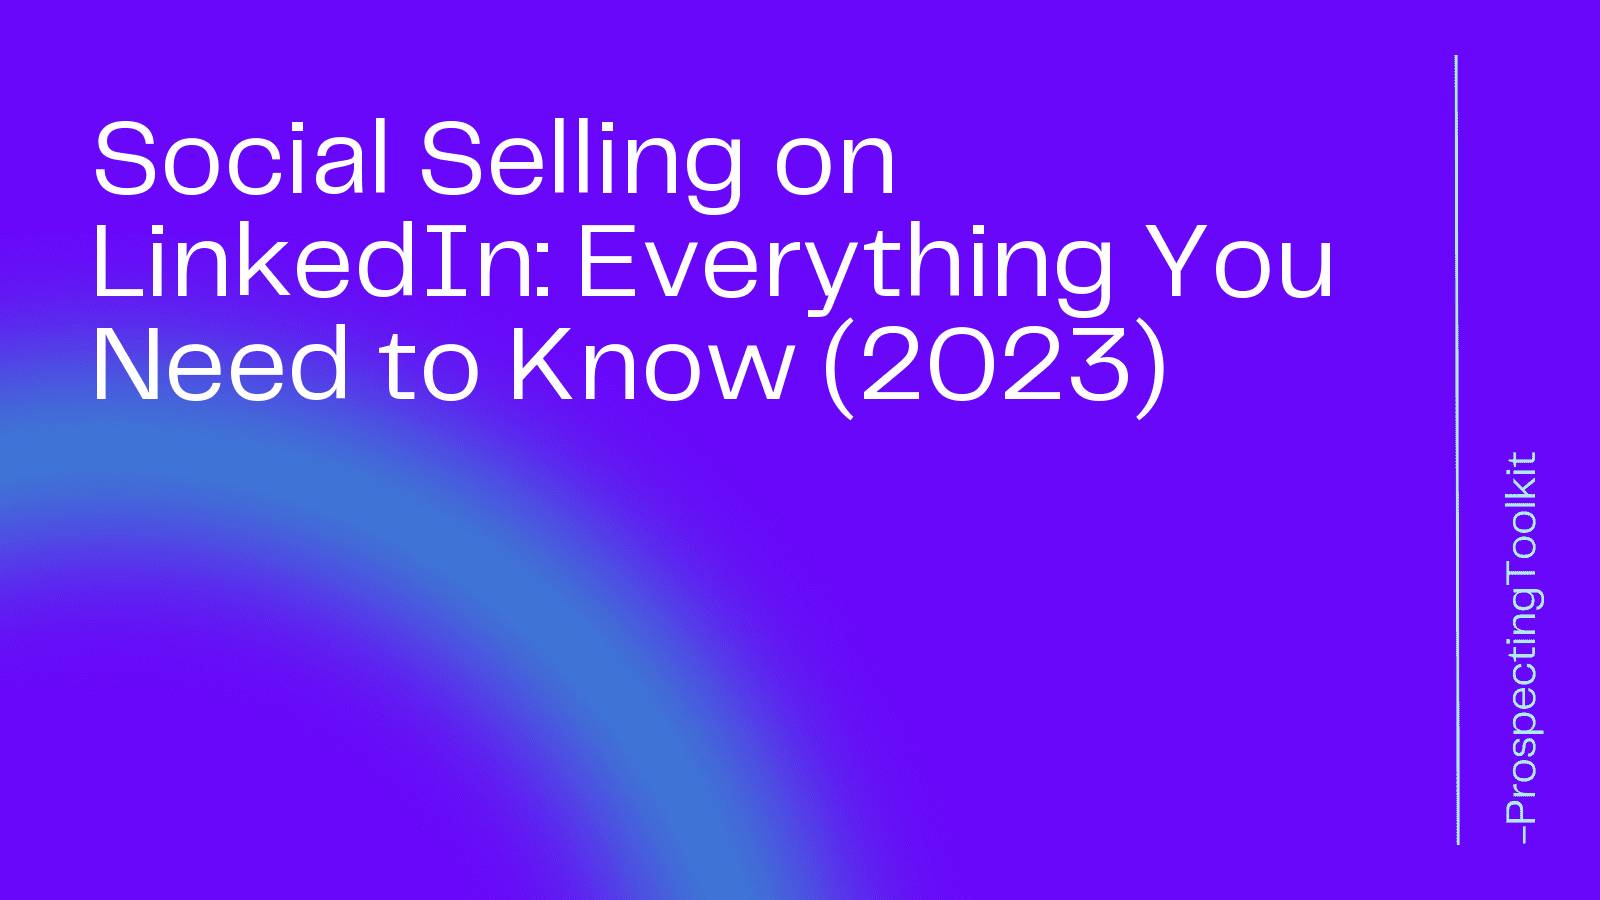 Social Selling on LinkedIn: Everything You Need to Know (2023)